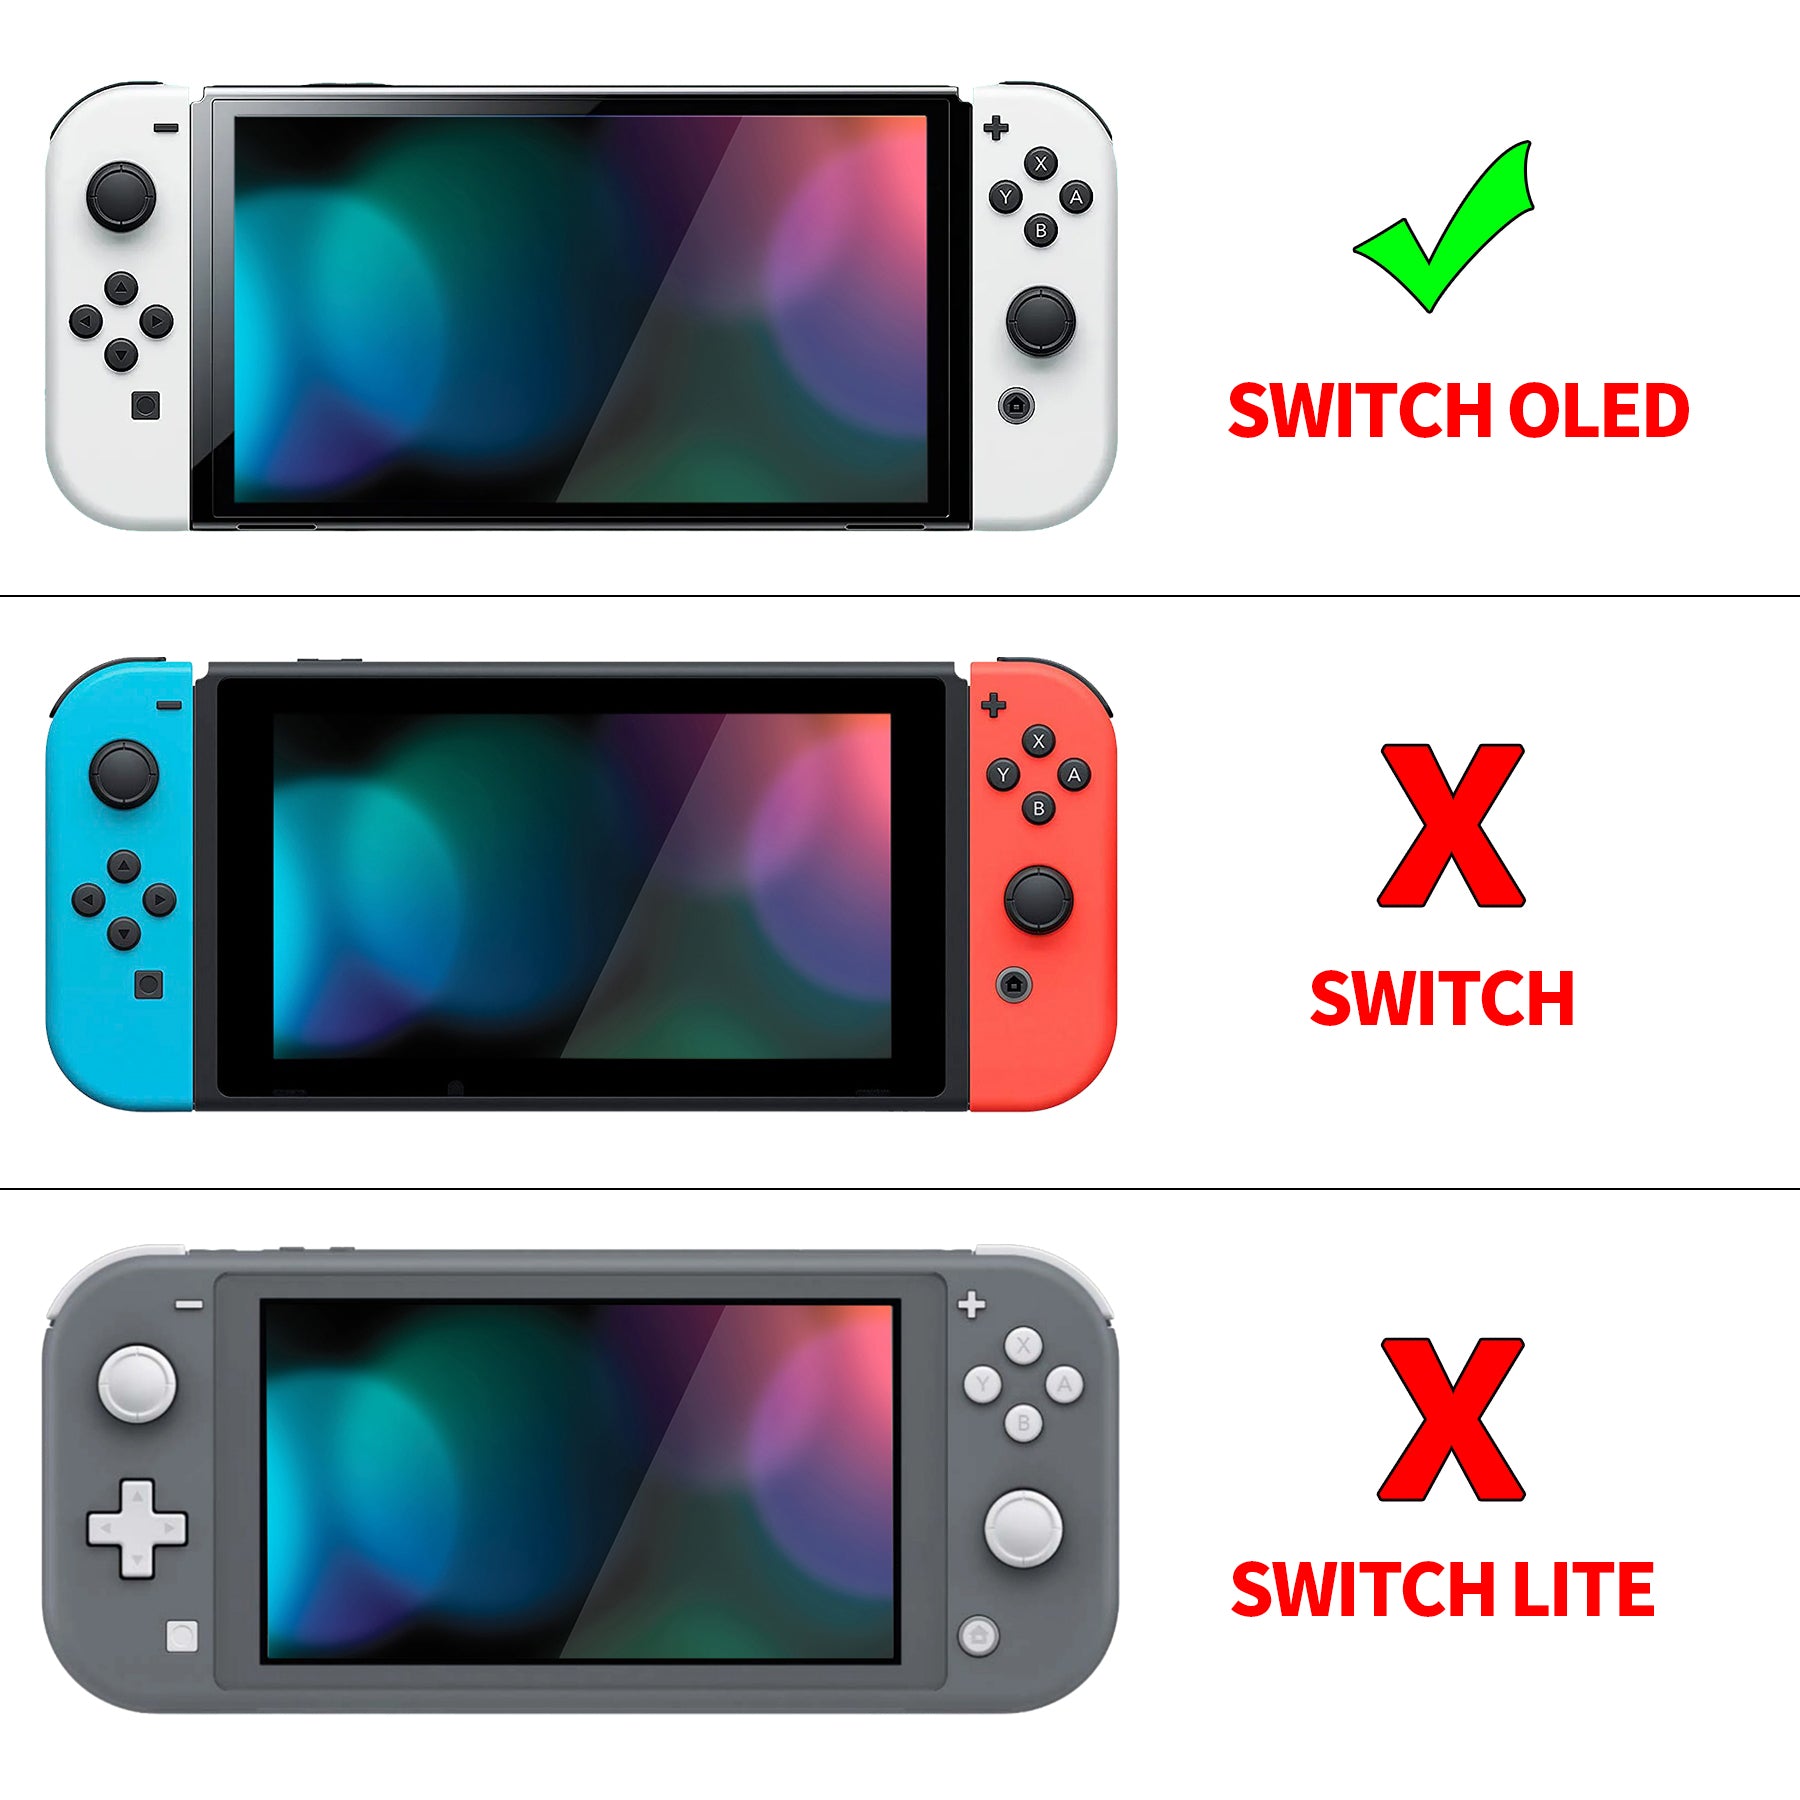 PlayVital ZealProtect Soft Protective Case for Switch OLED, Flexible Protector Grip Cover for Switch OLED with Thumb Grip Caps & ABXY Direction Button Caps - Magic Wings - XSOYV6046 playvital